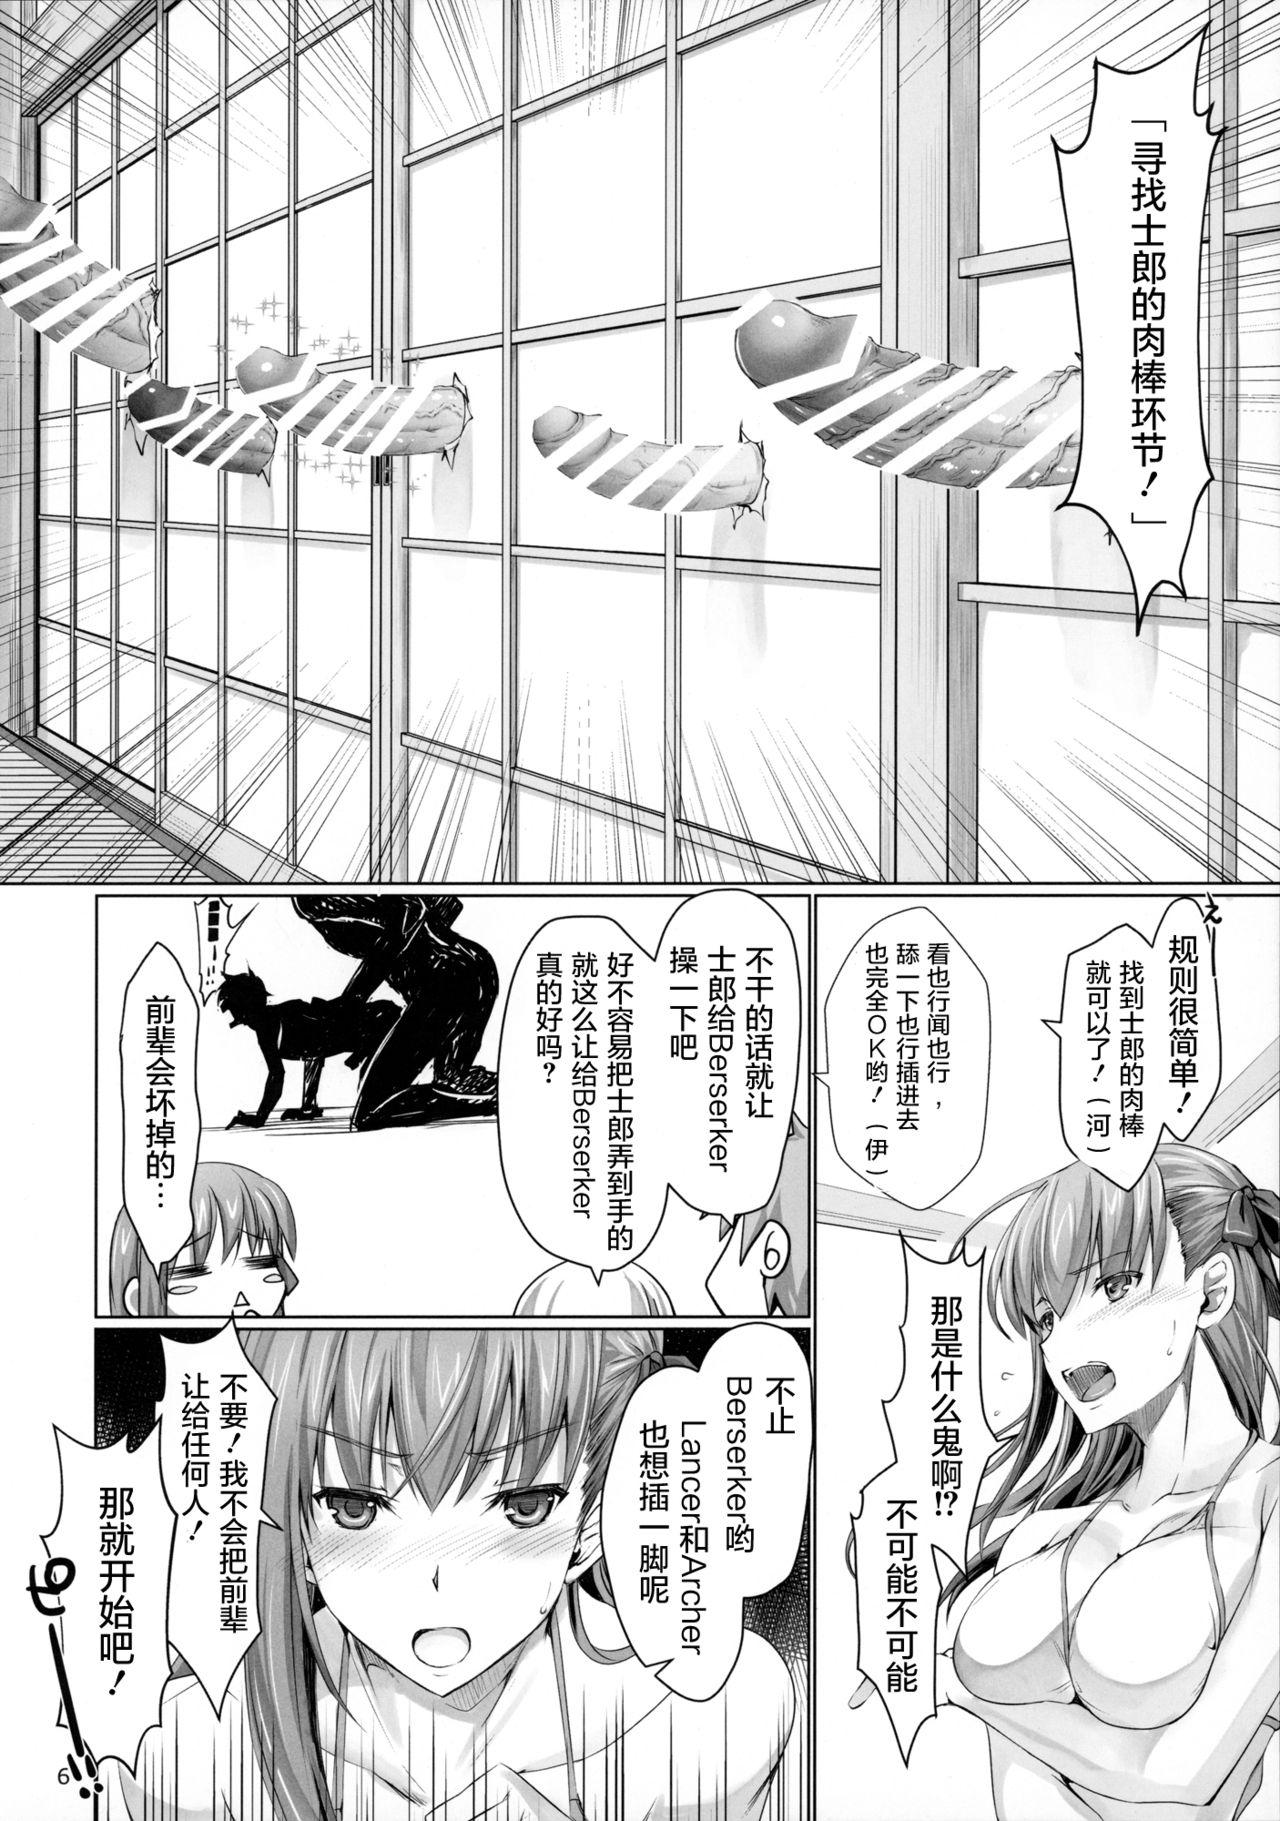 Con I miss you. - Fate stay night Caught - Page 6